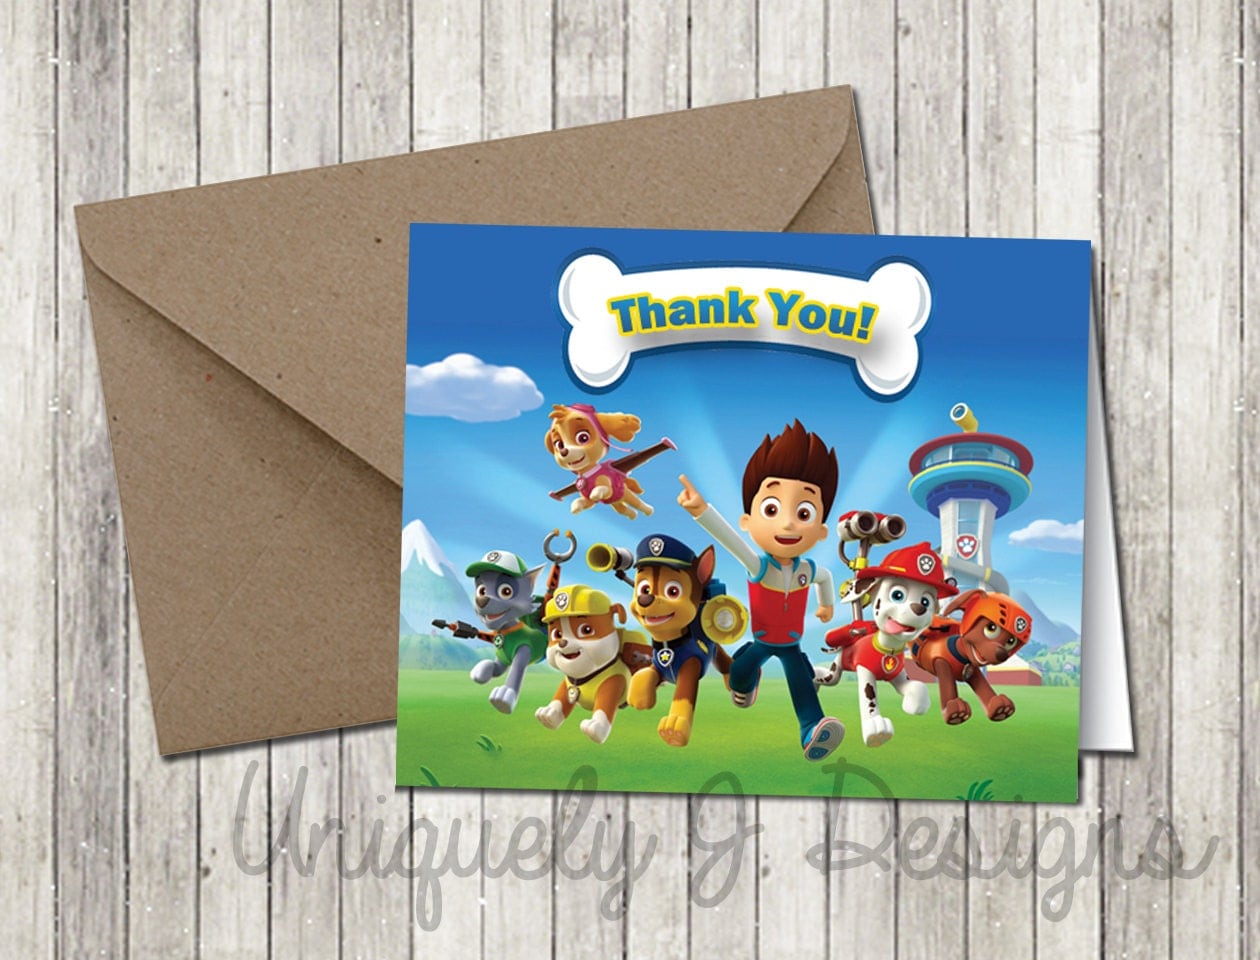 paw-patrol-thank-you-cards-instant-download-by-uniquelyjdesigns